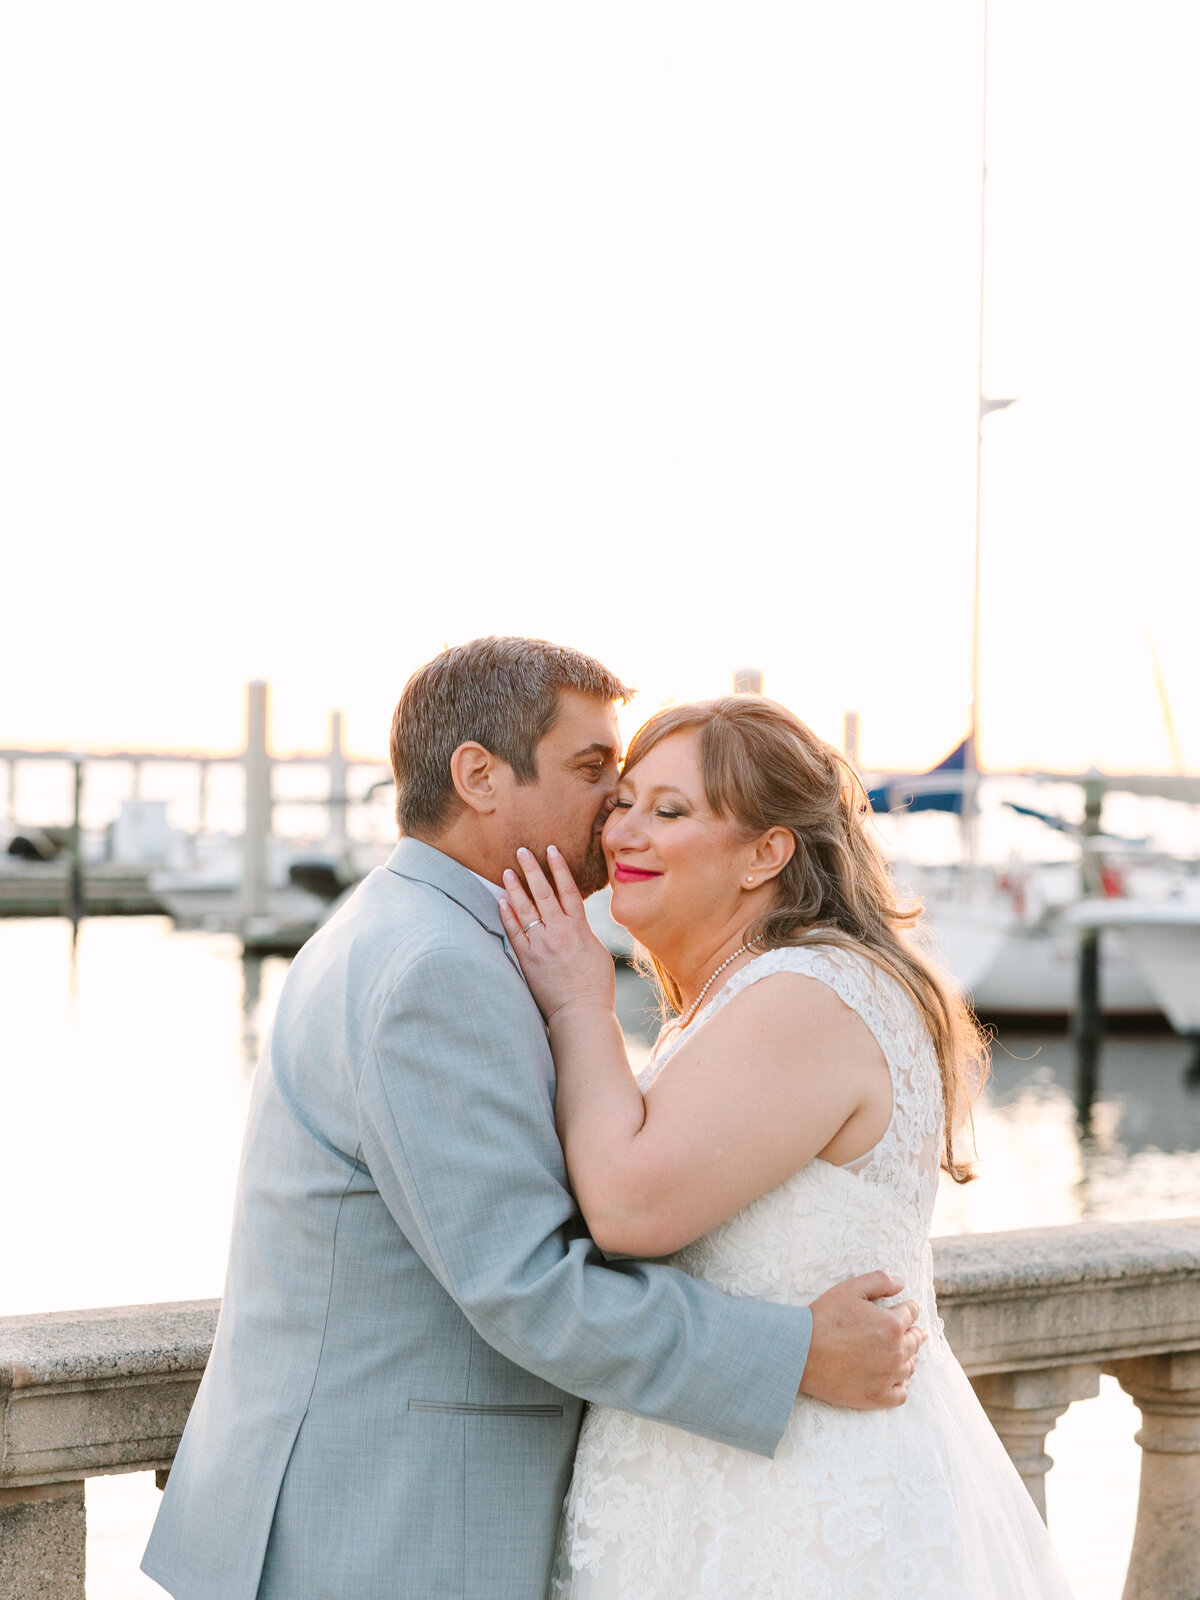 LAURA PEREZ PHOTOGRAPHY LLC EPPING FOREST YACHT CLUB WEDDINGS ADINA AND WES-126